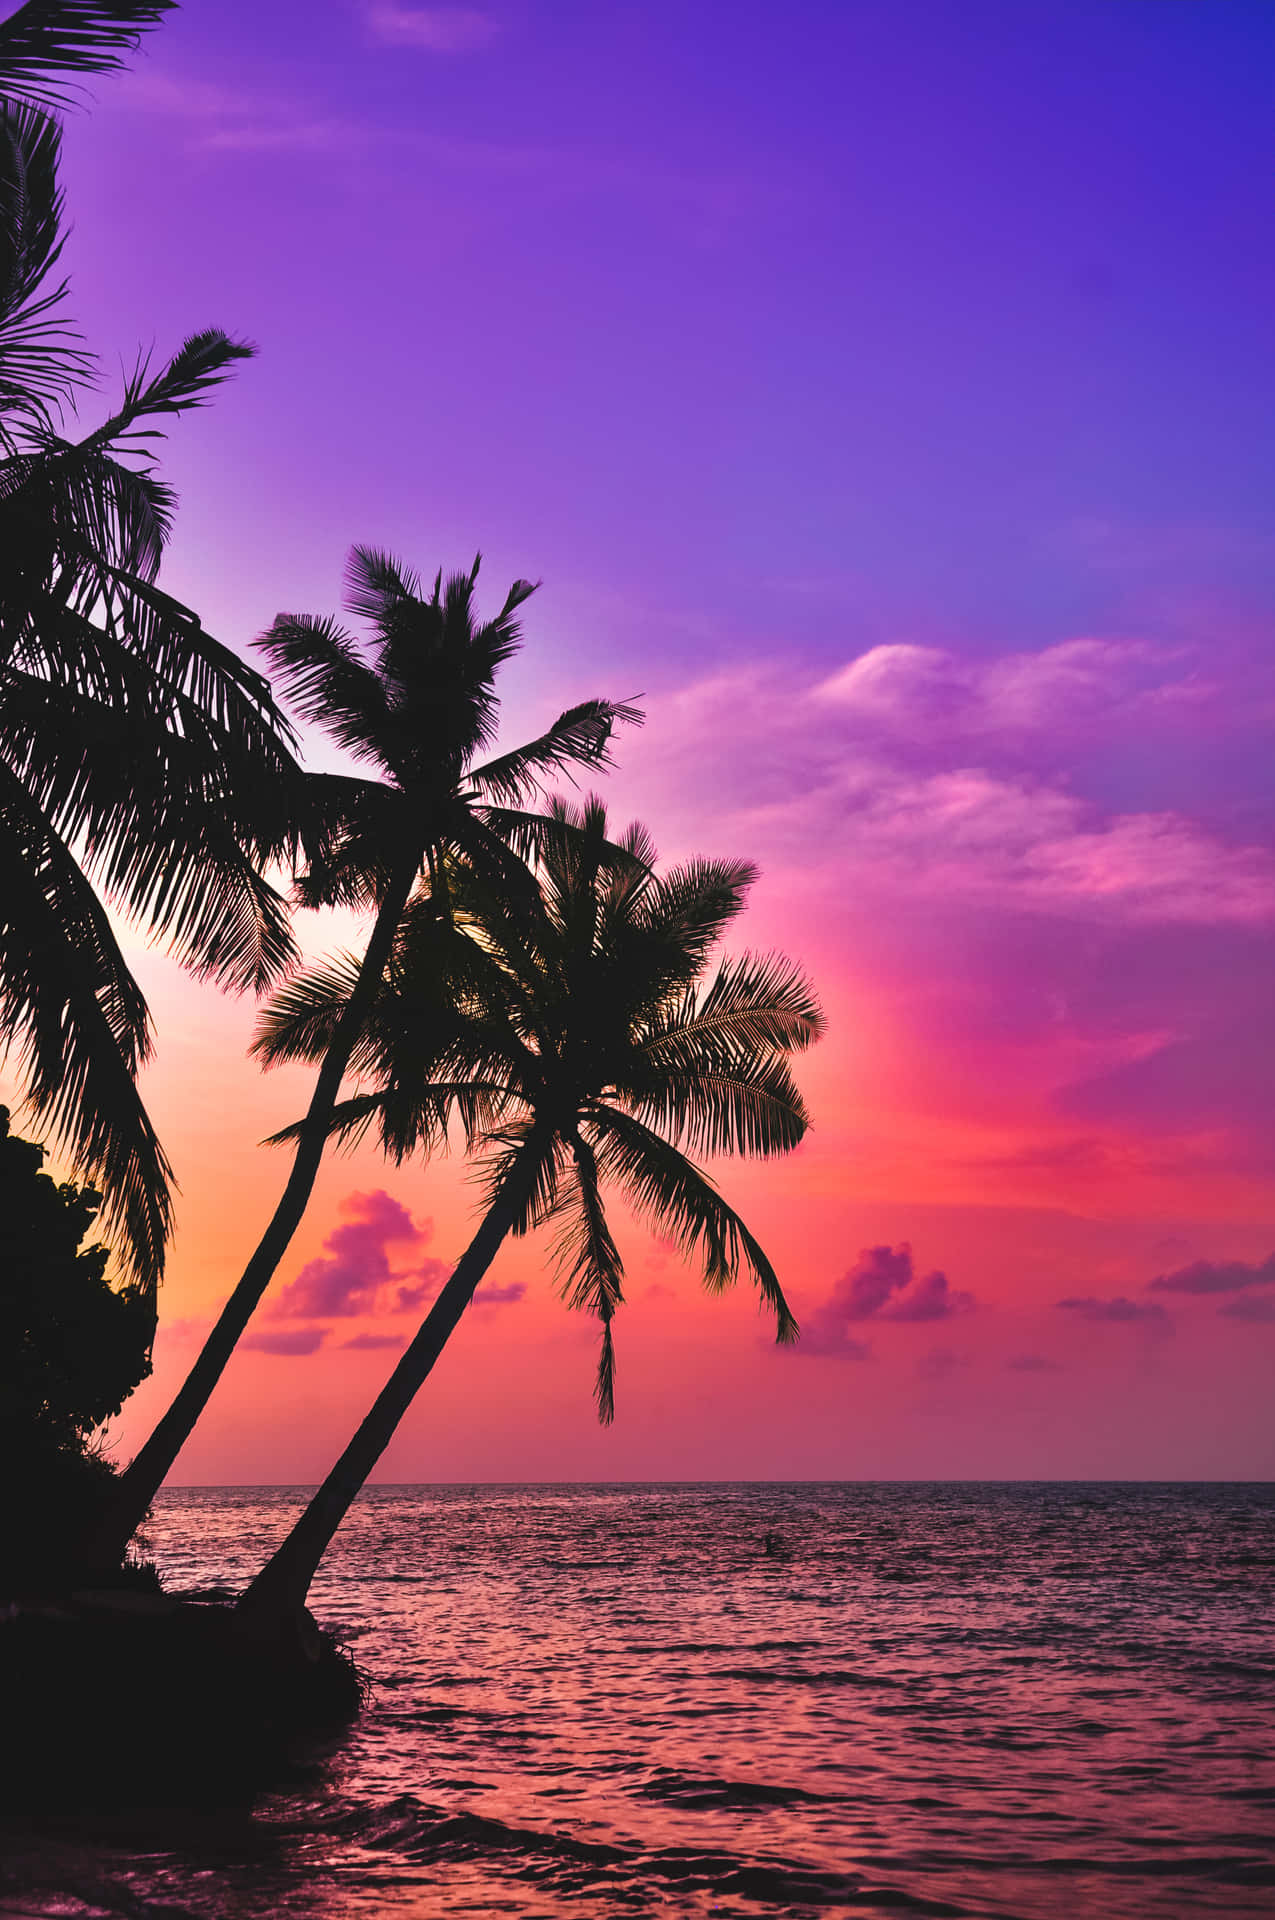 Pink Beach Sunset With Palm Trees Wallpaper